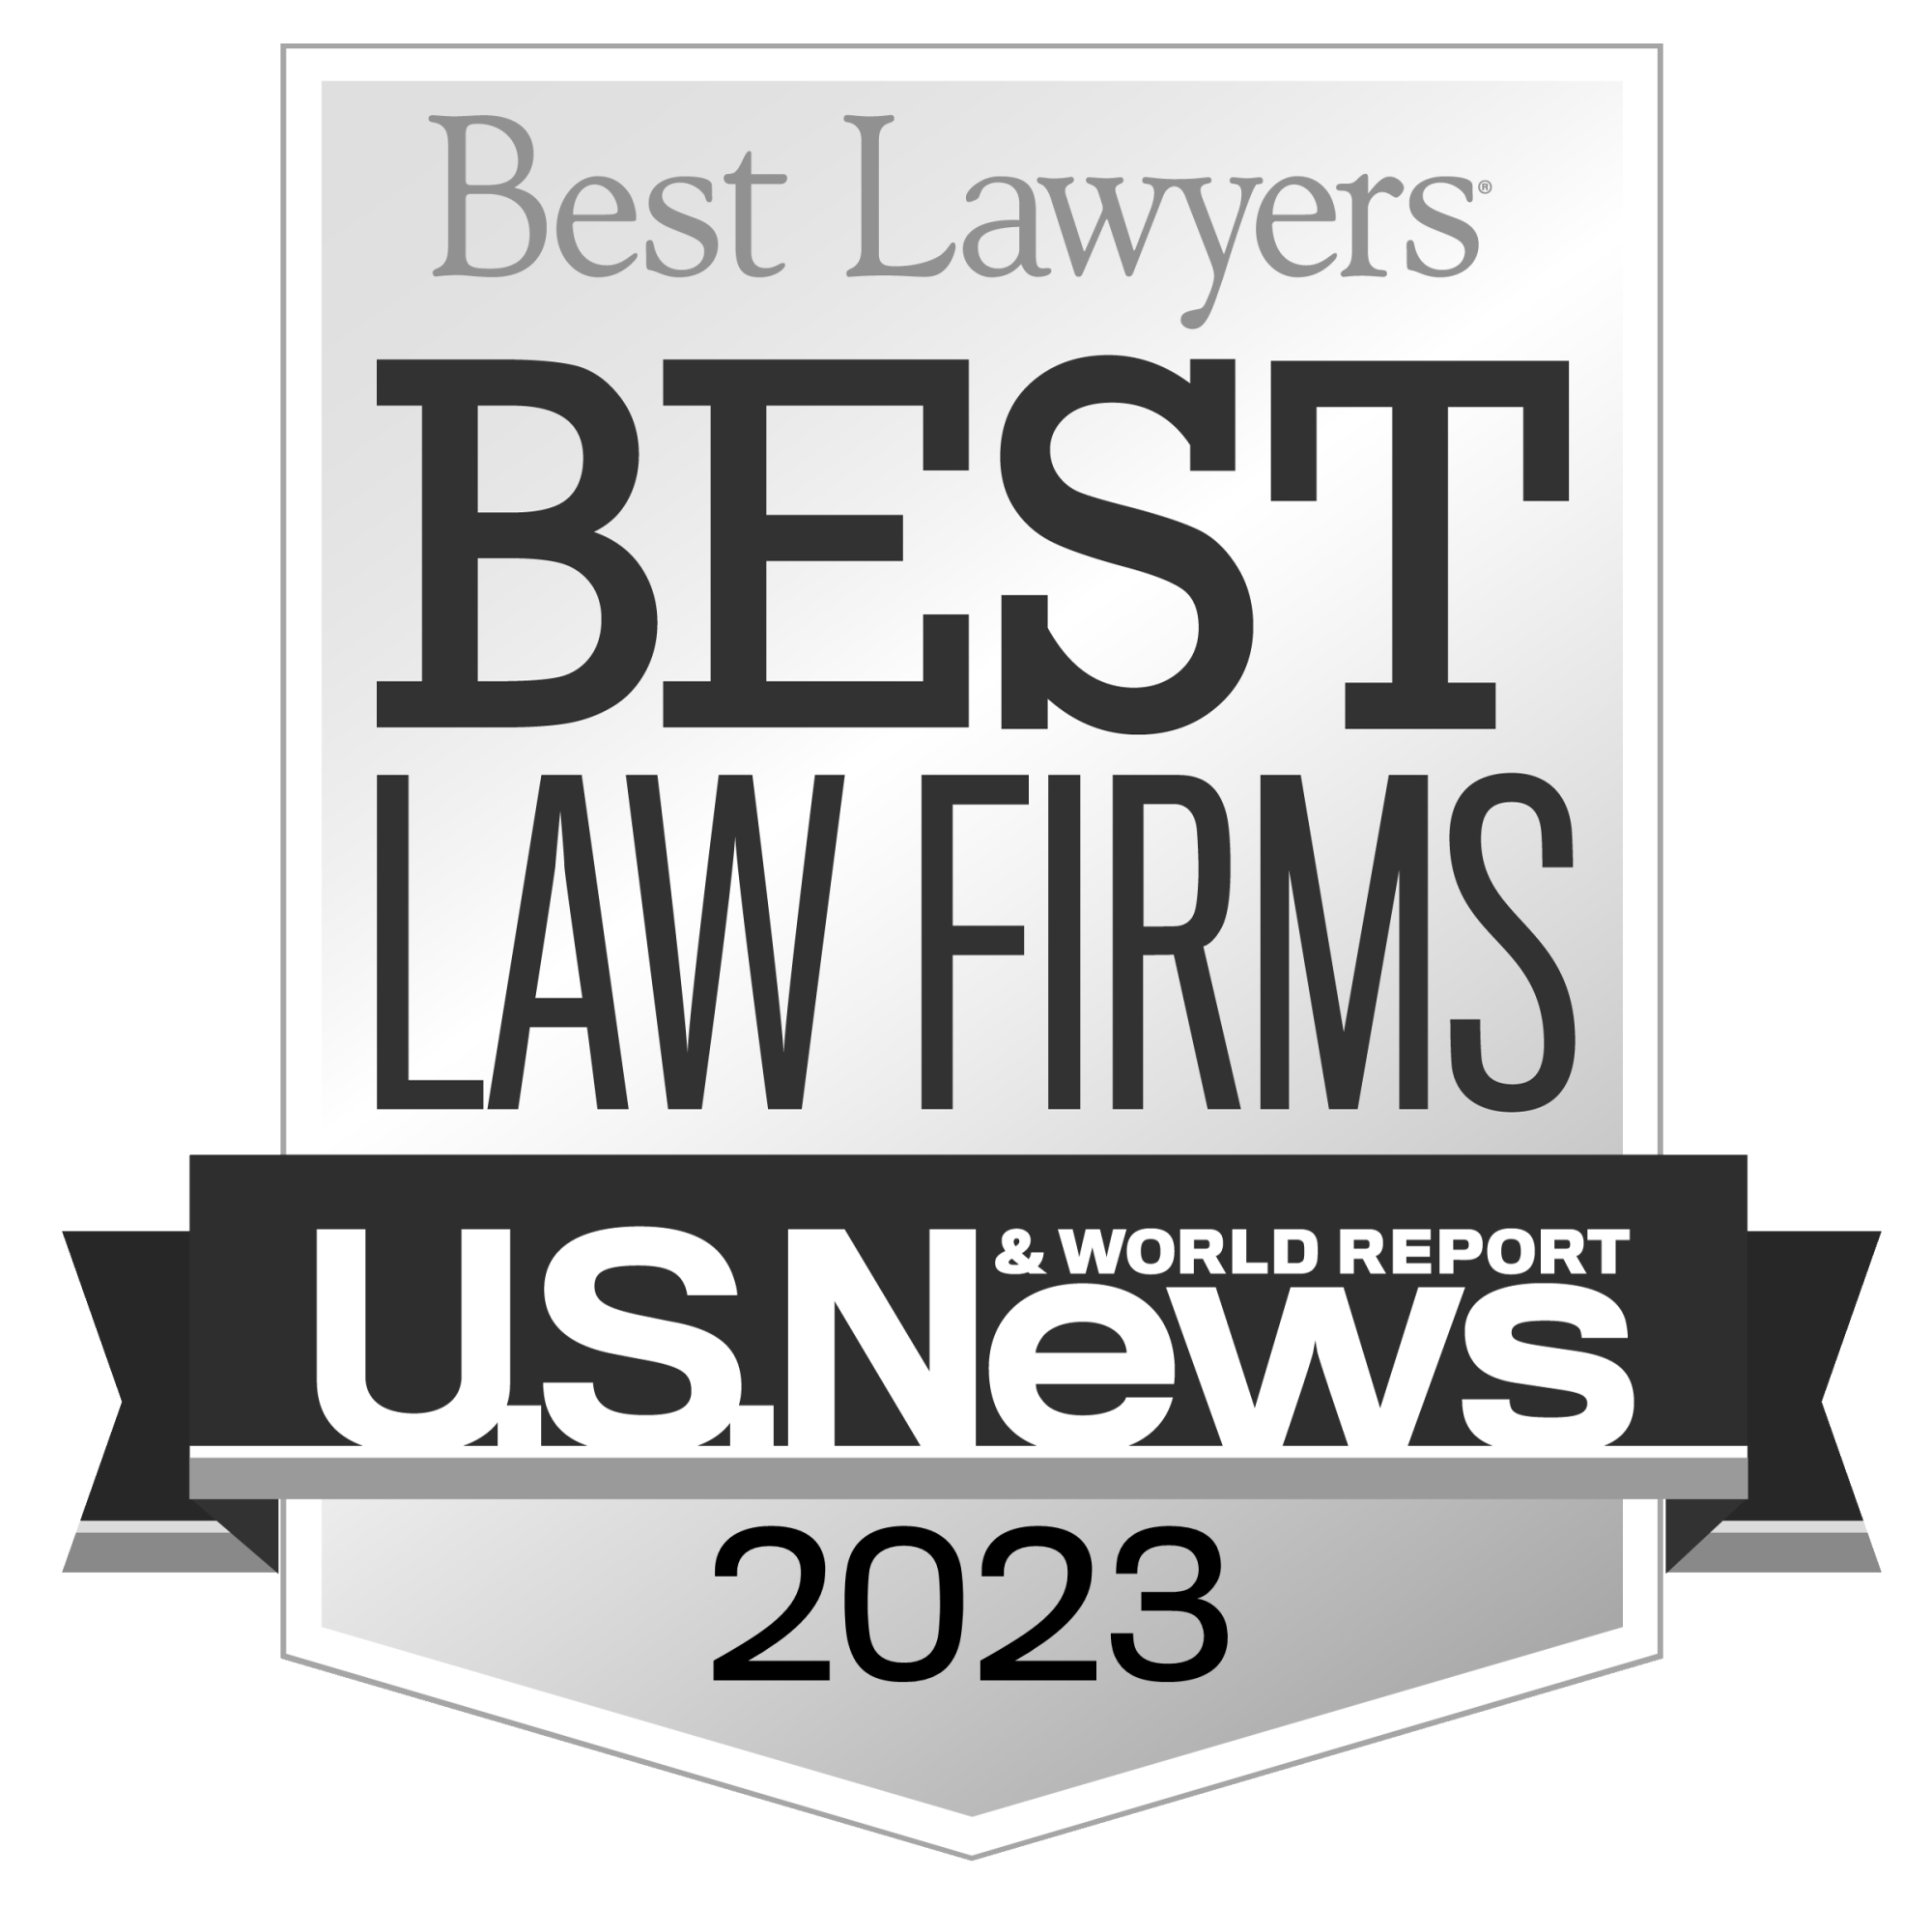 U.S. News & World Report and Best Lawyers "Best Law Firm" 2022